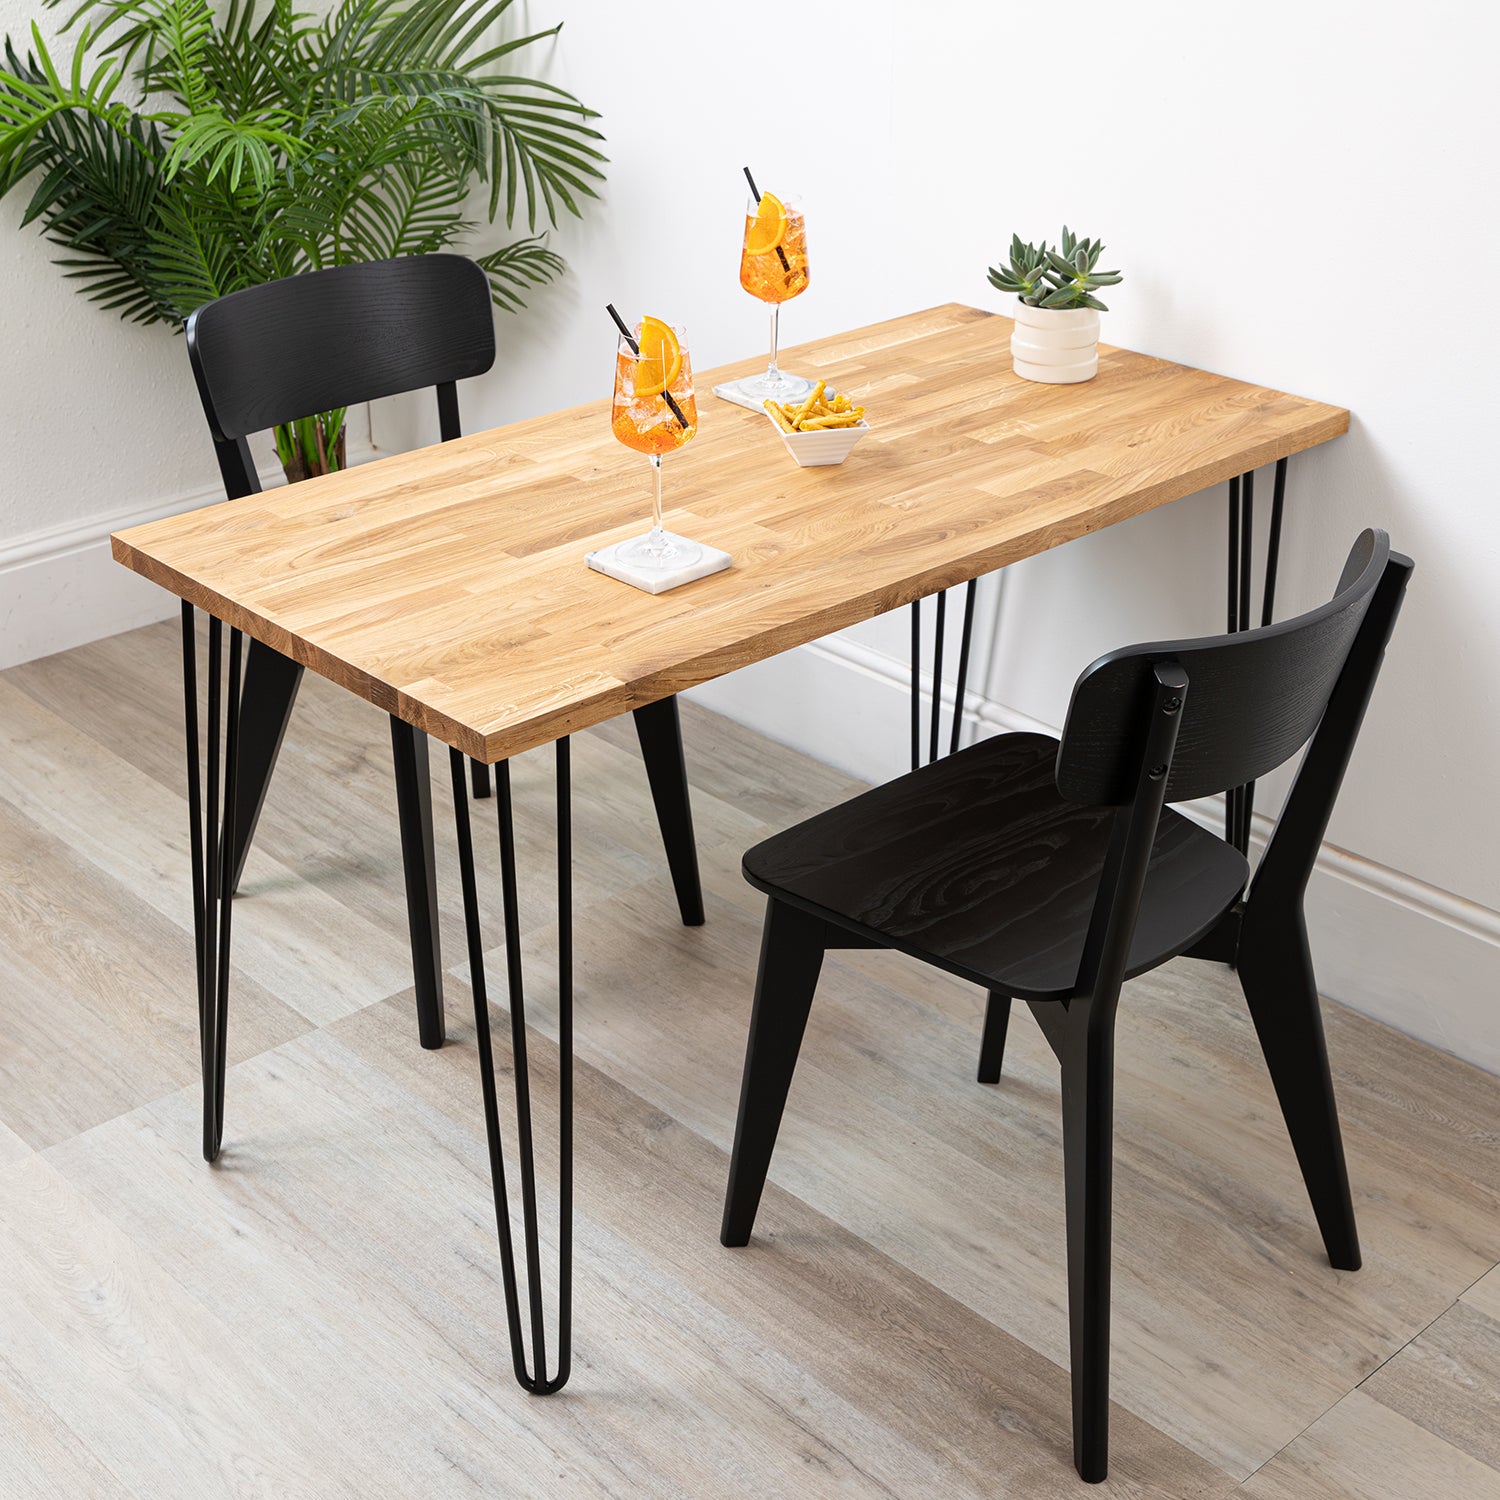 Oak Solid Wood Table with Black Hairpin Legs